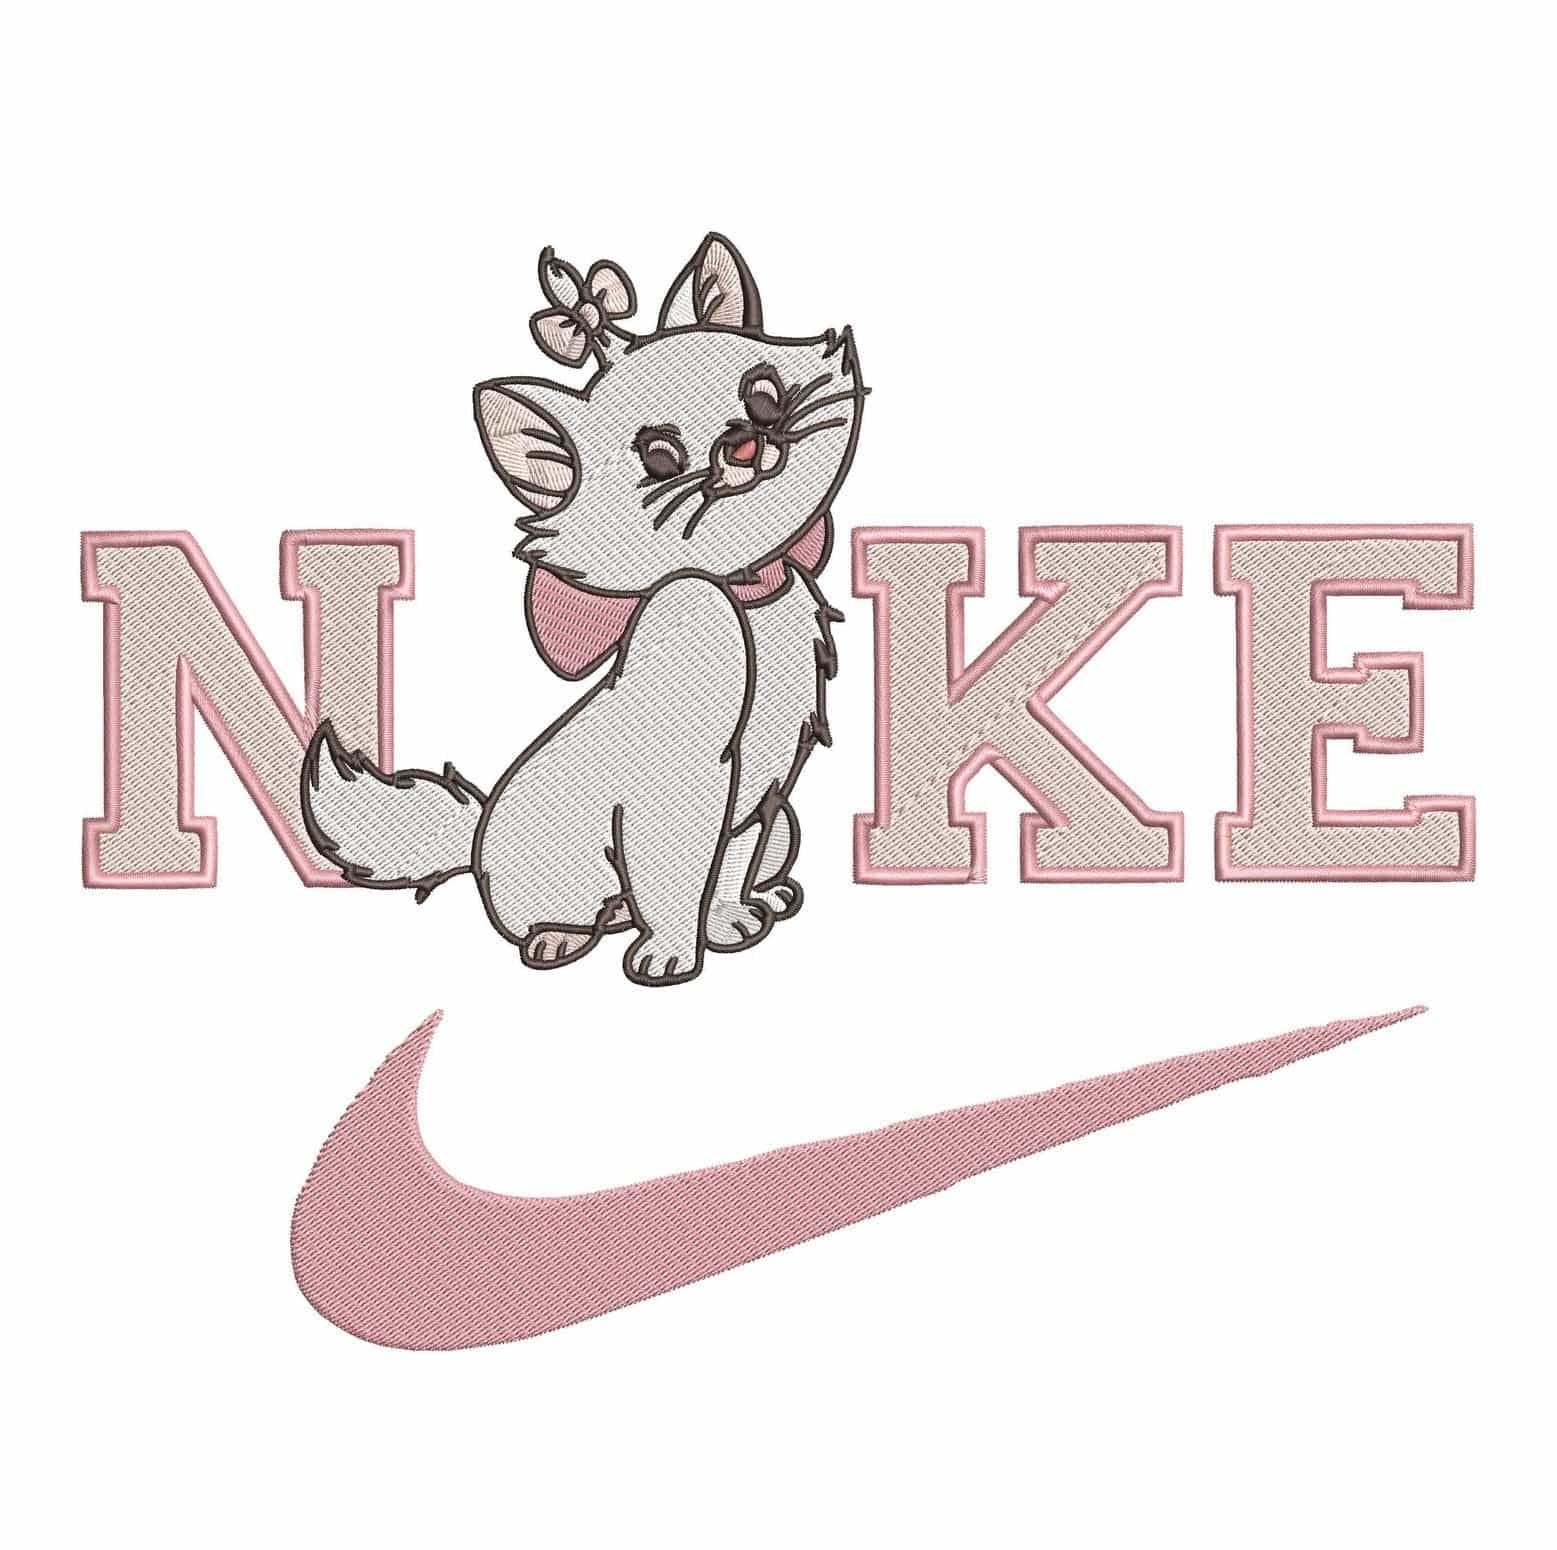 Nike Marie - The Aristocats - Embroidery Design FineryEmbroidery